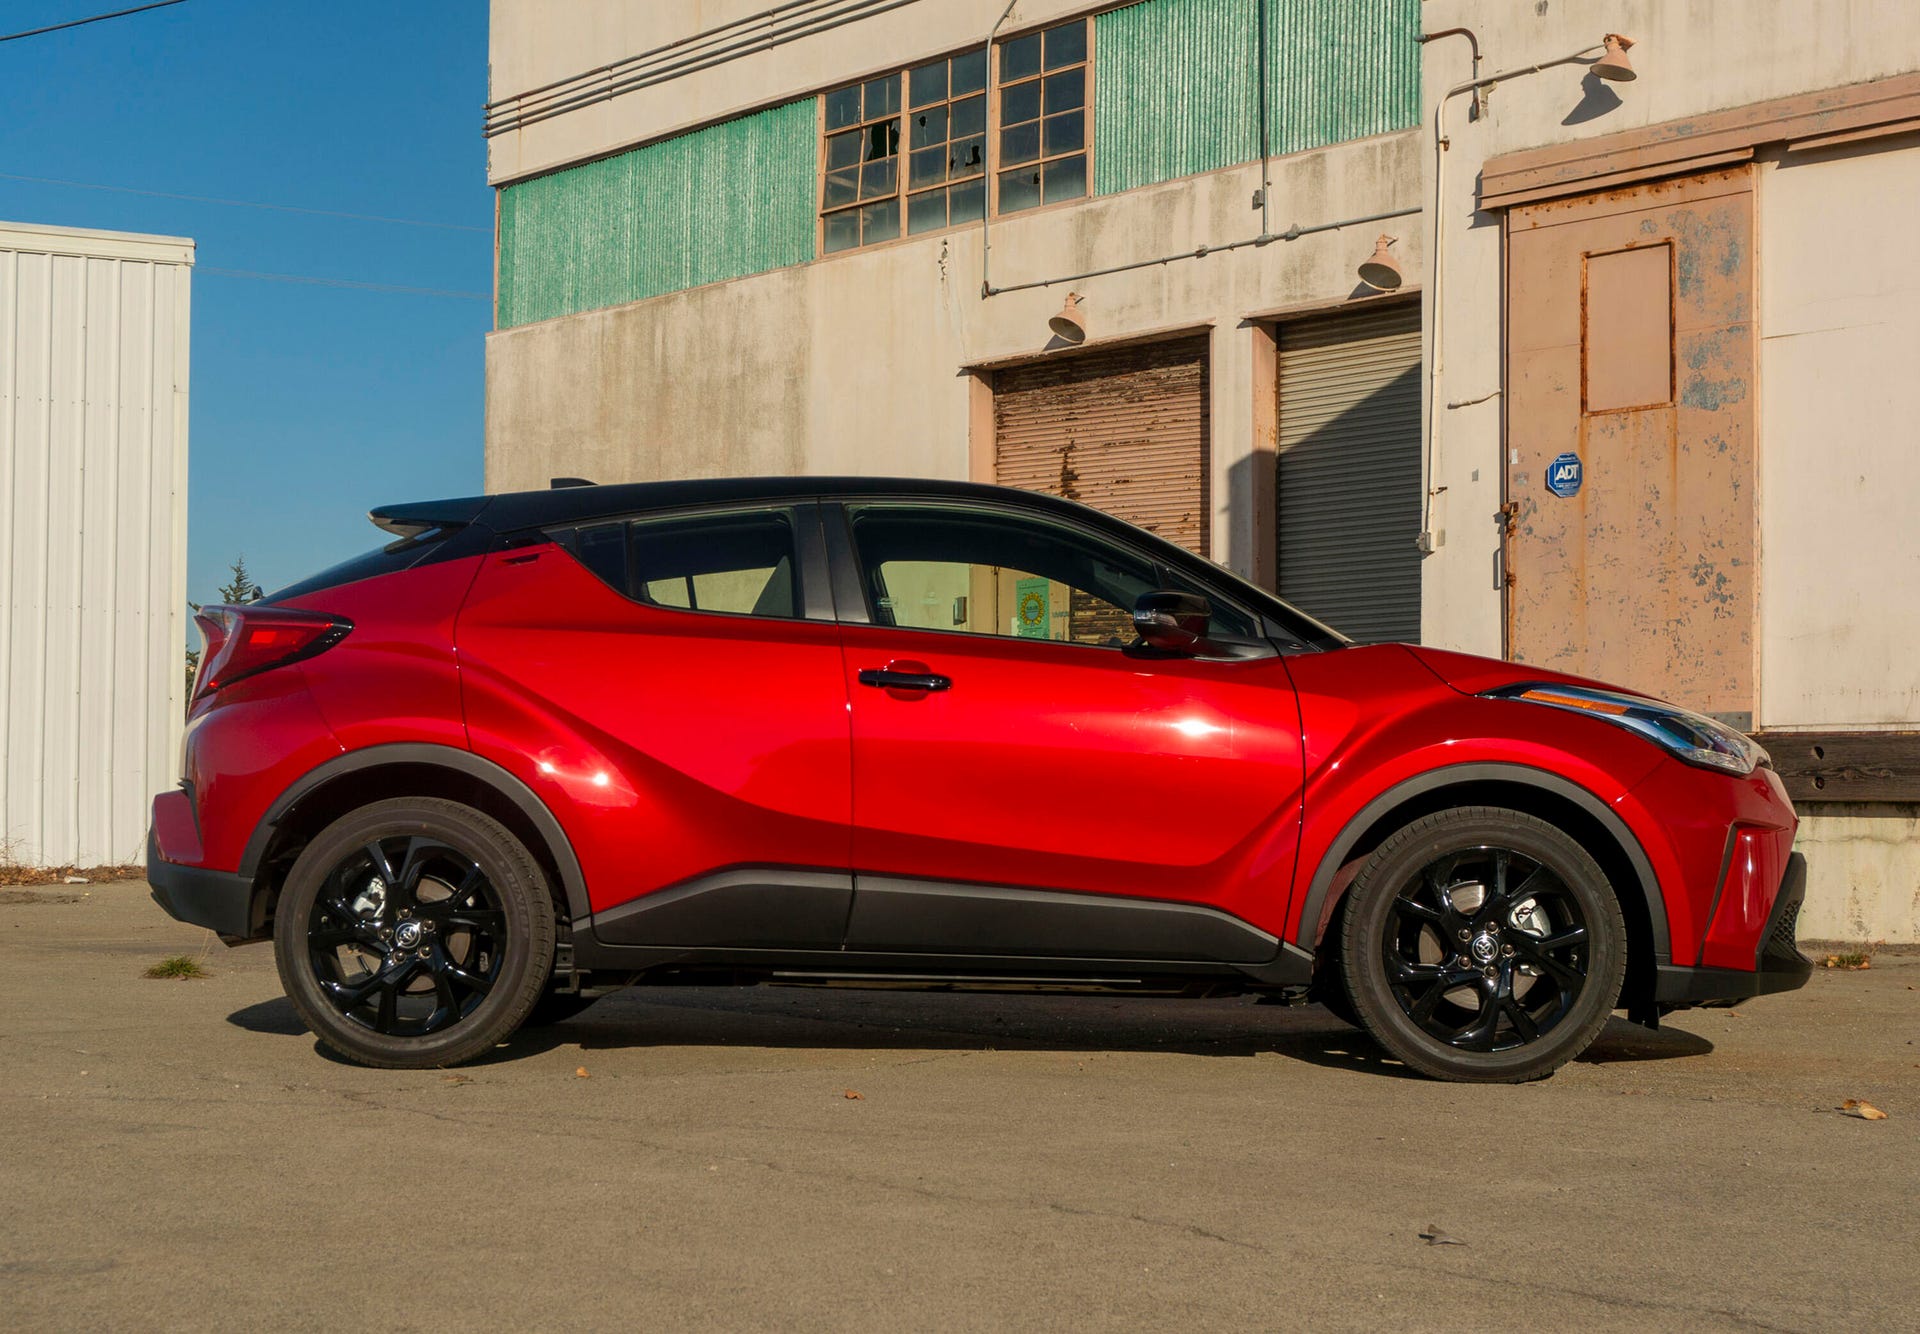 2022 Toyota C-HR Review  Features, Interior & Cargo Space